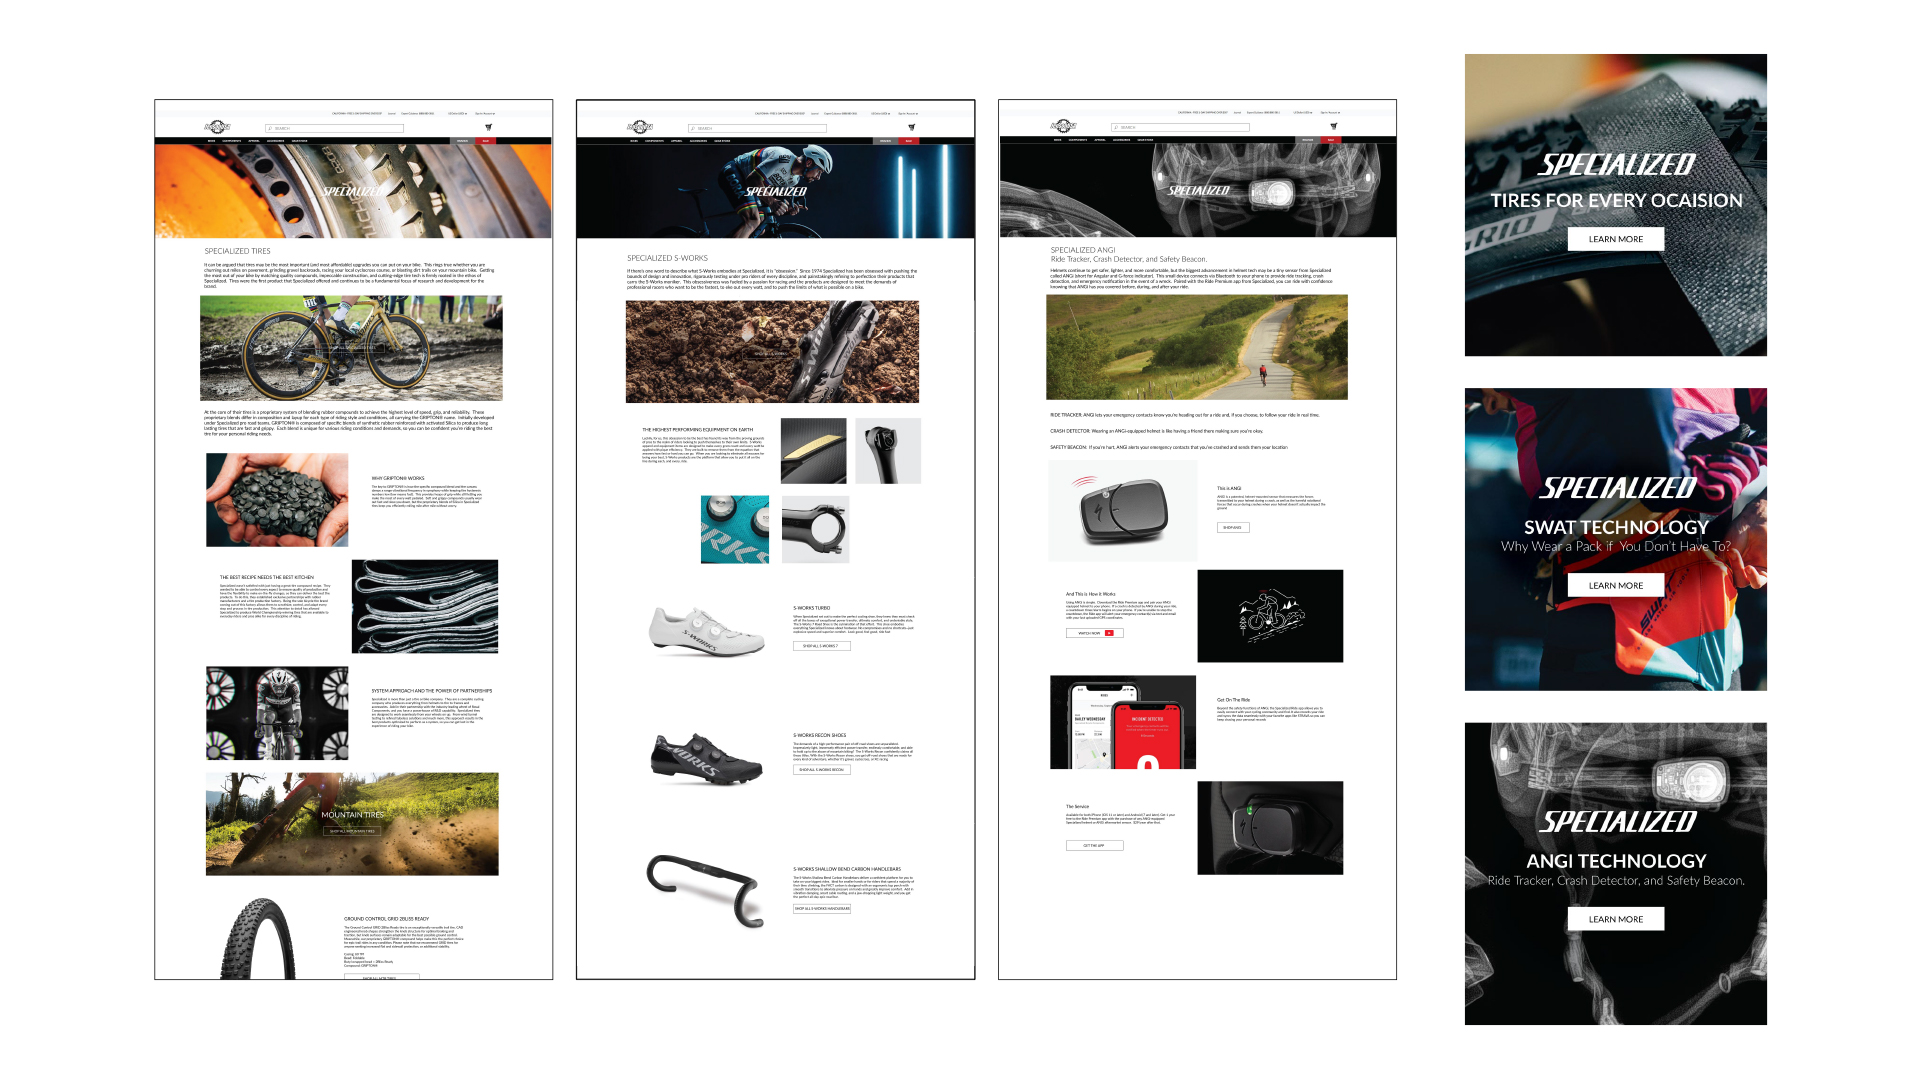 specialized brand pages and campaign highlights